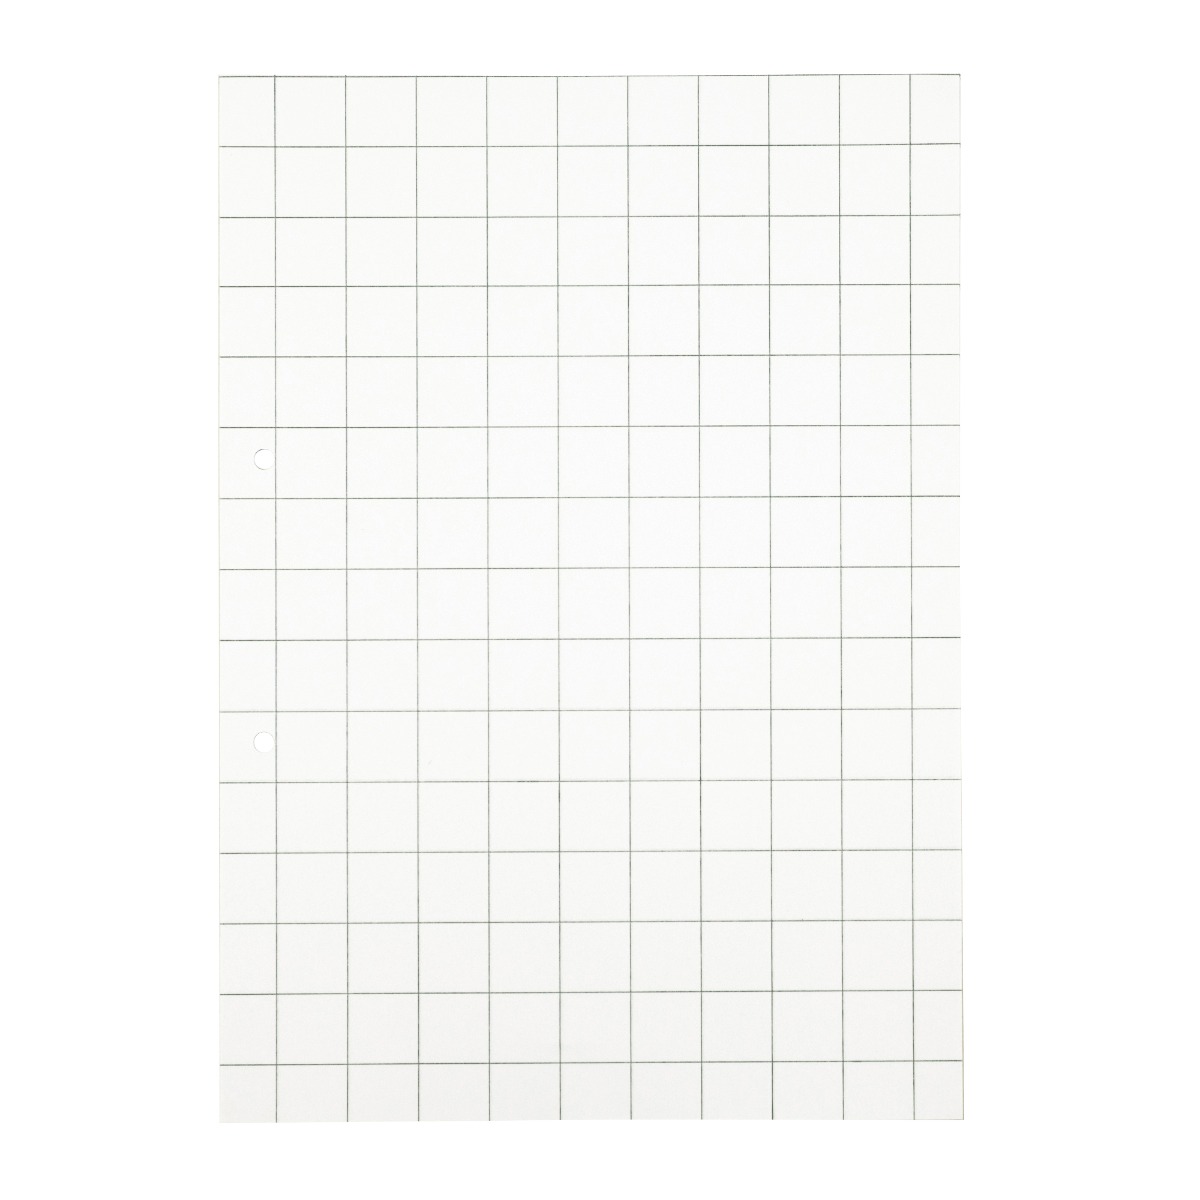 Exercise Paper A4 20mm Squared Unpunched